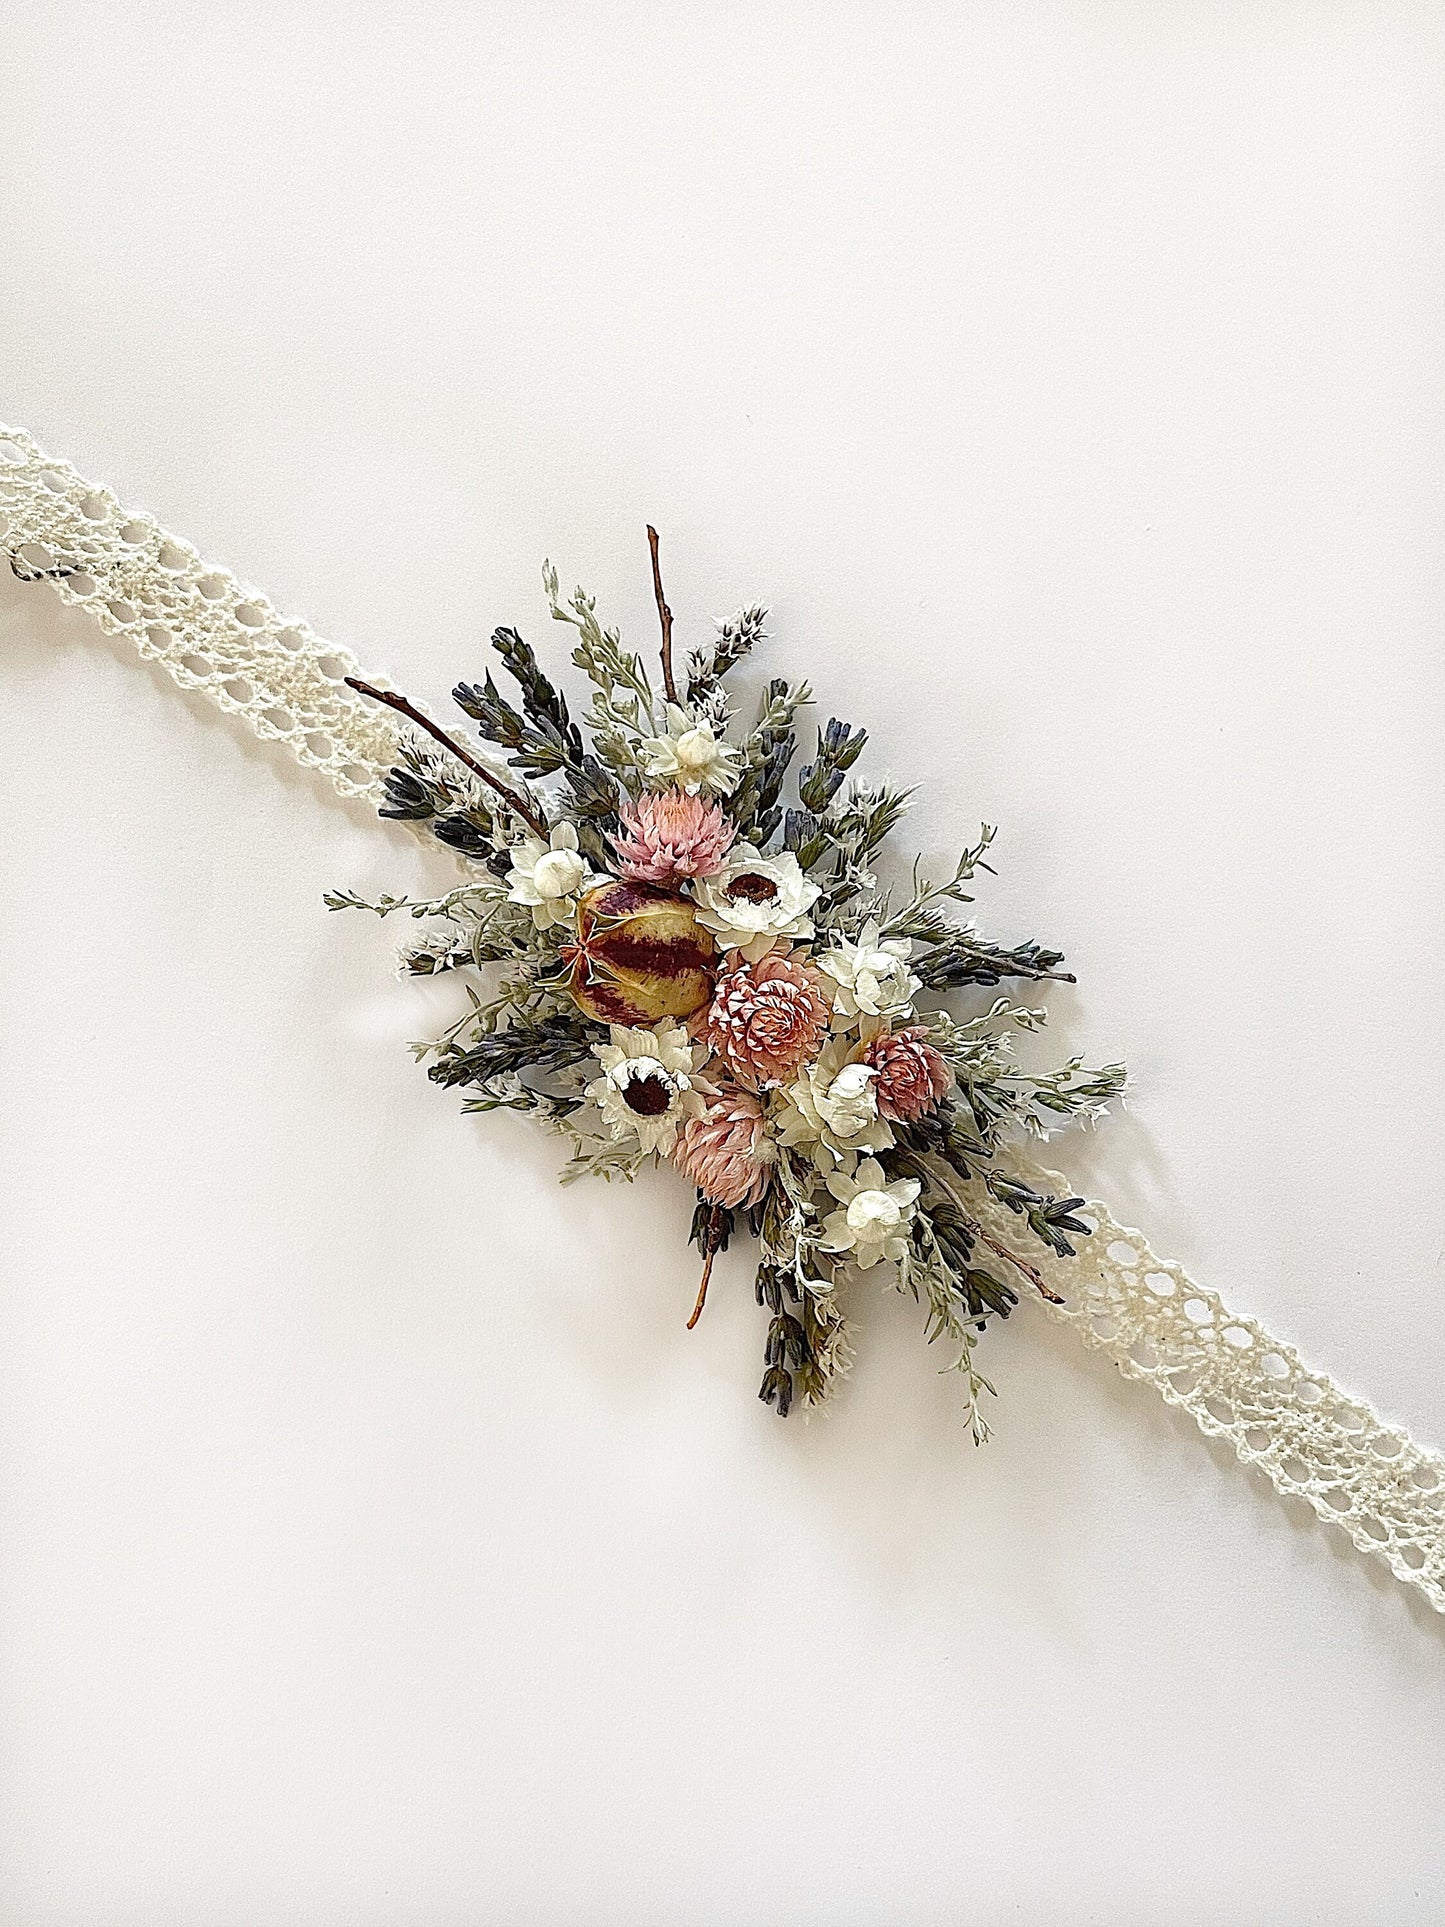 Hair Comb, Hair Pins, Dried flowers, Preserved, Floral Comb, Hair Clip Accessories, Wedding Accessory, Simple, Wedding Corsage, Prom, Bridal